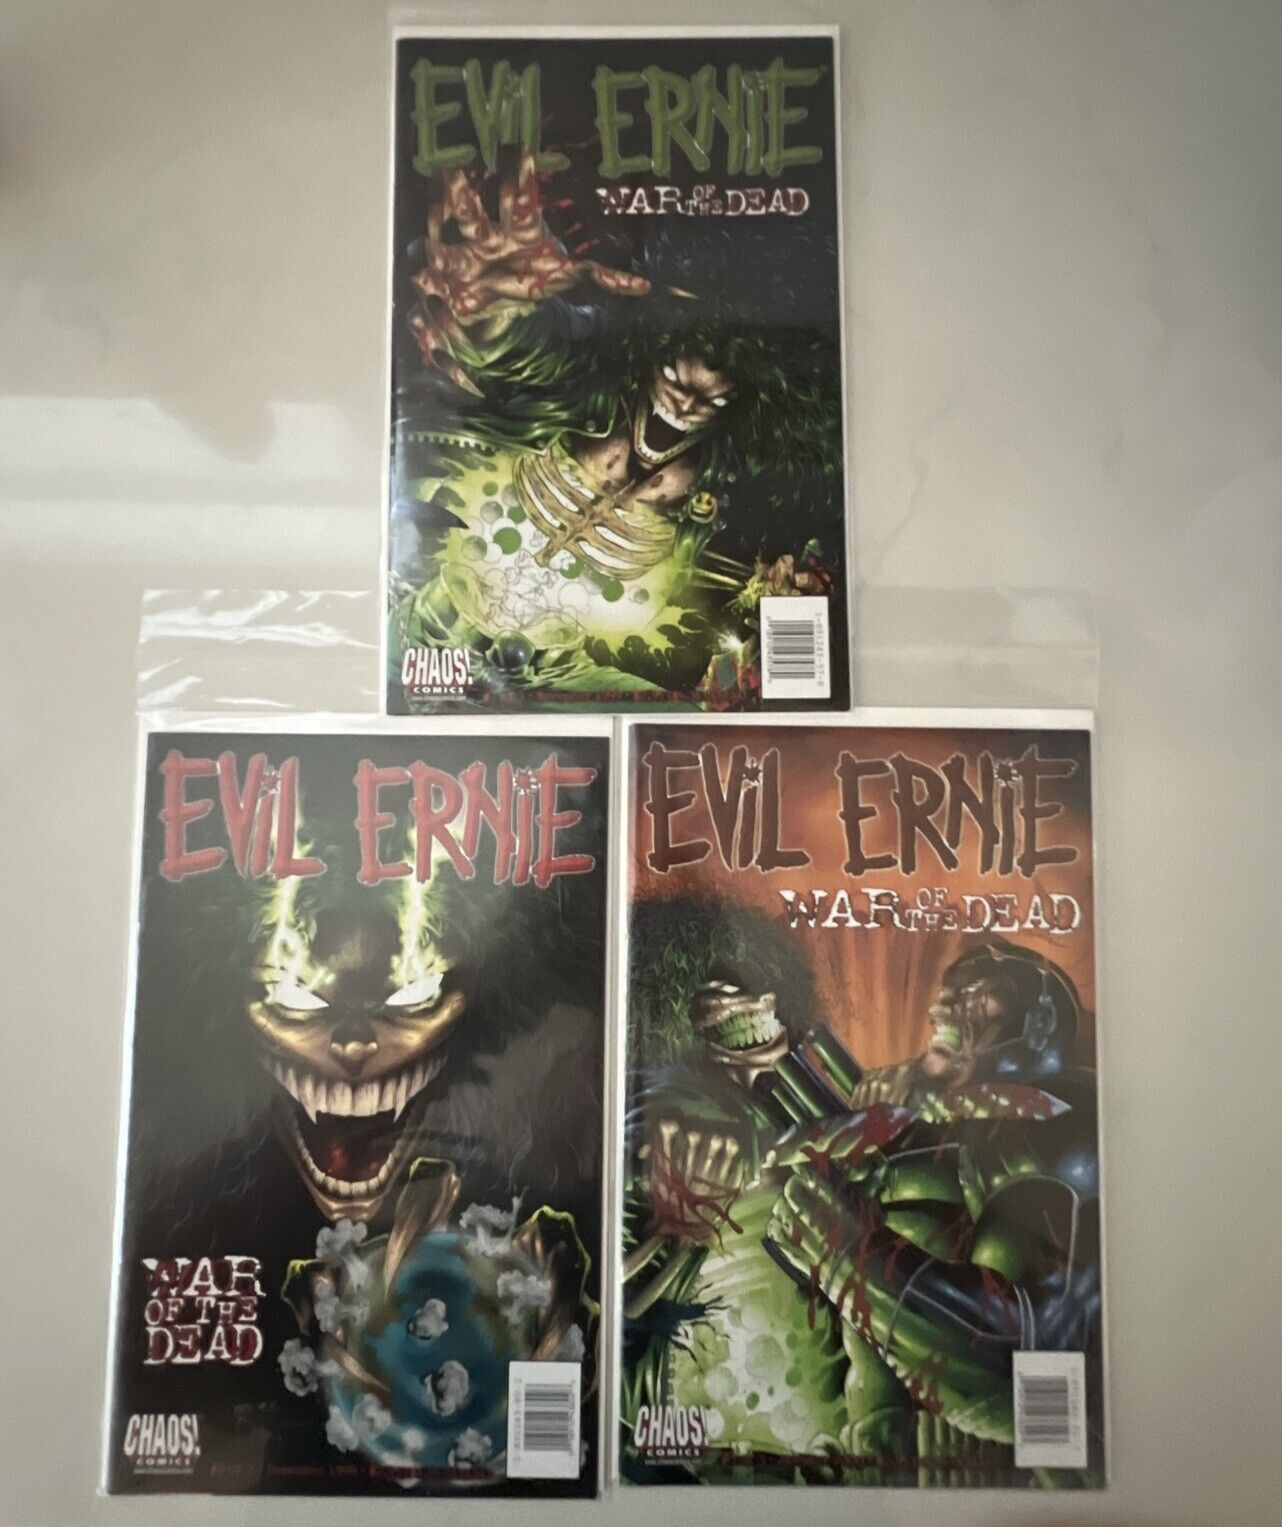 Chaos Comics Evil Ernie War Of The Dead 1-3 - bag / board in very good condition